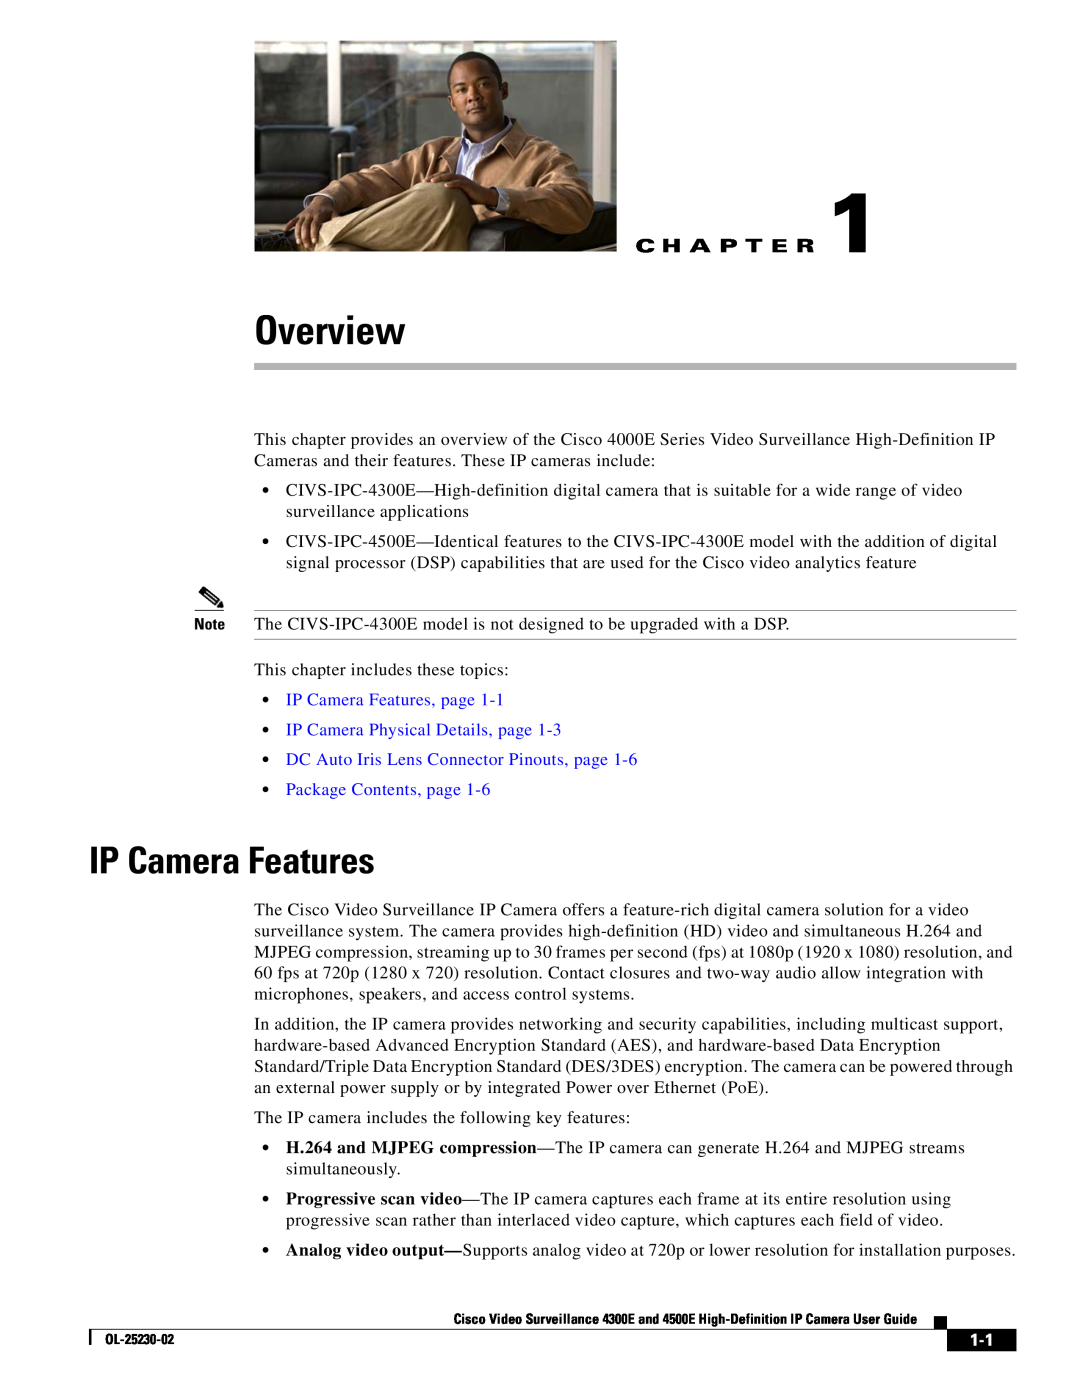 Cisco Systems 4500E, 4300E manual Overview, C H A P T E R, IP Camera Features, page, IP Camera Physical Details, page 